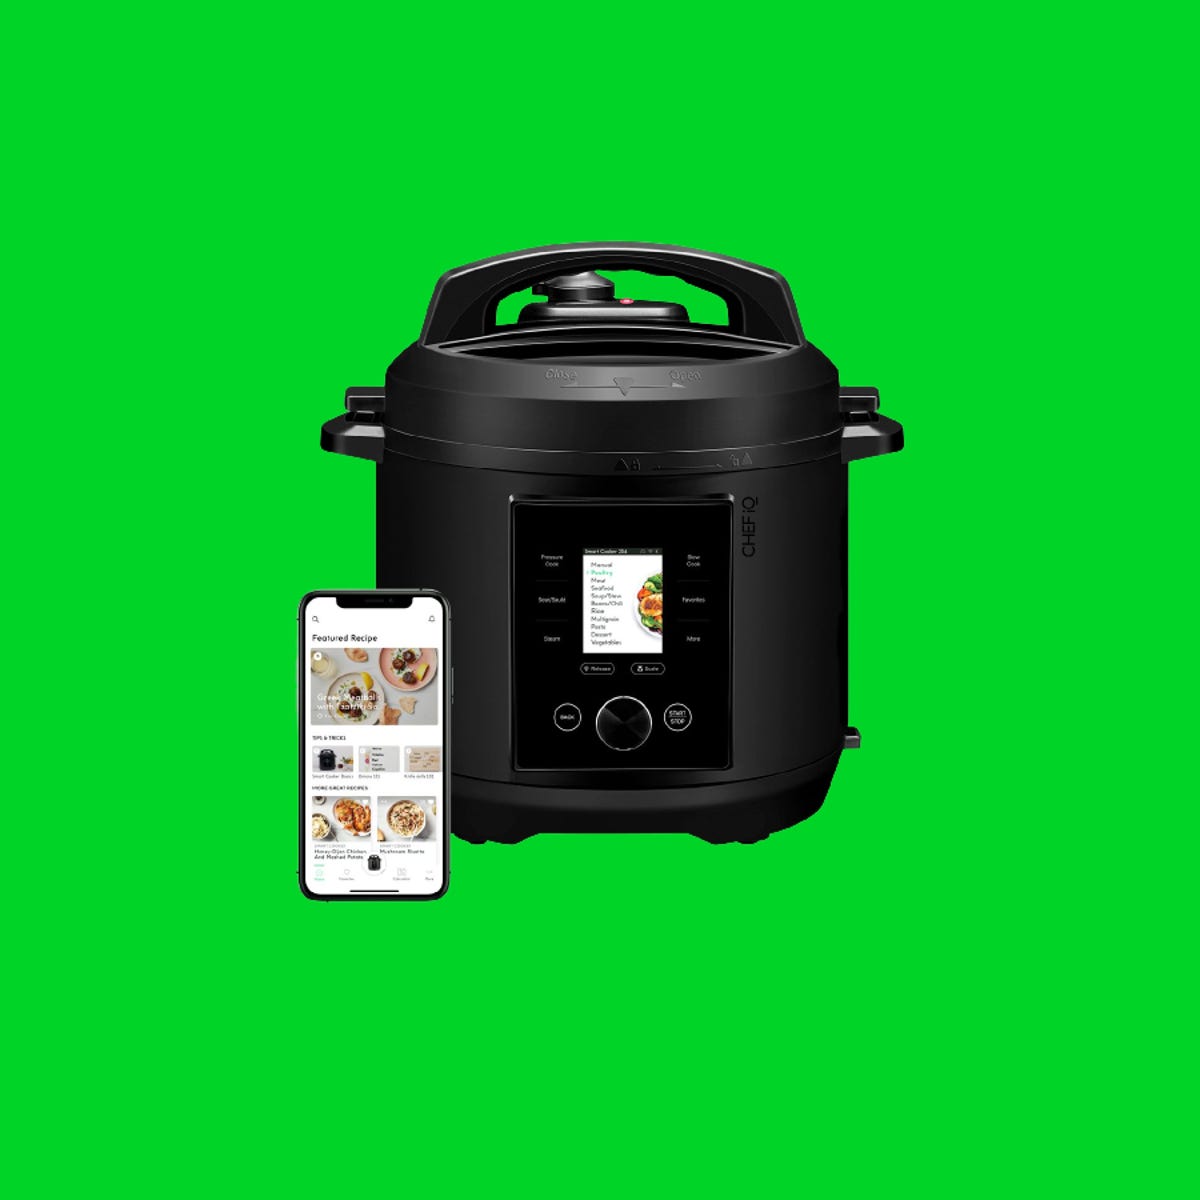 This $100 Smart Pressure Cooker From Chef iQ Is the Perfect